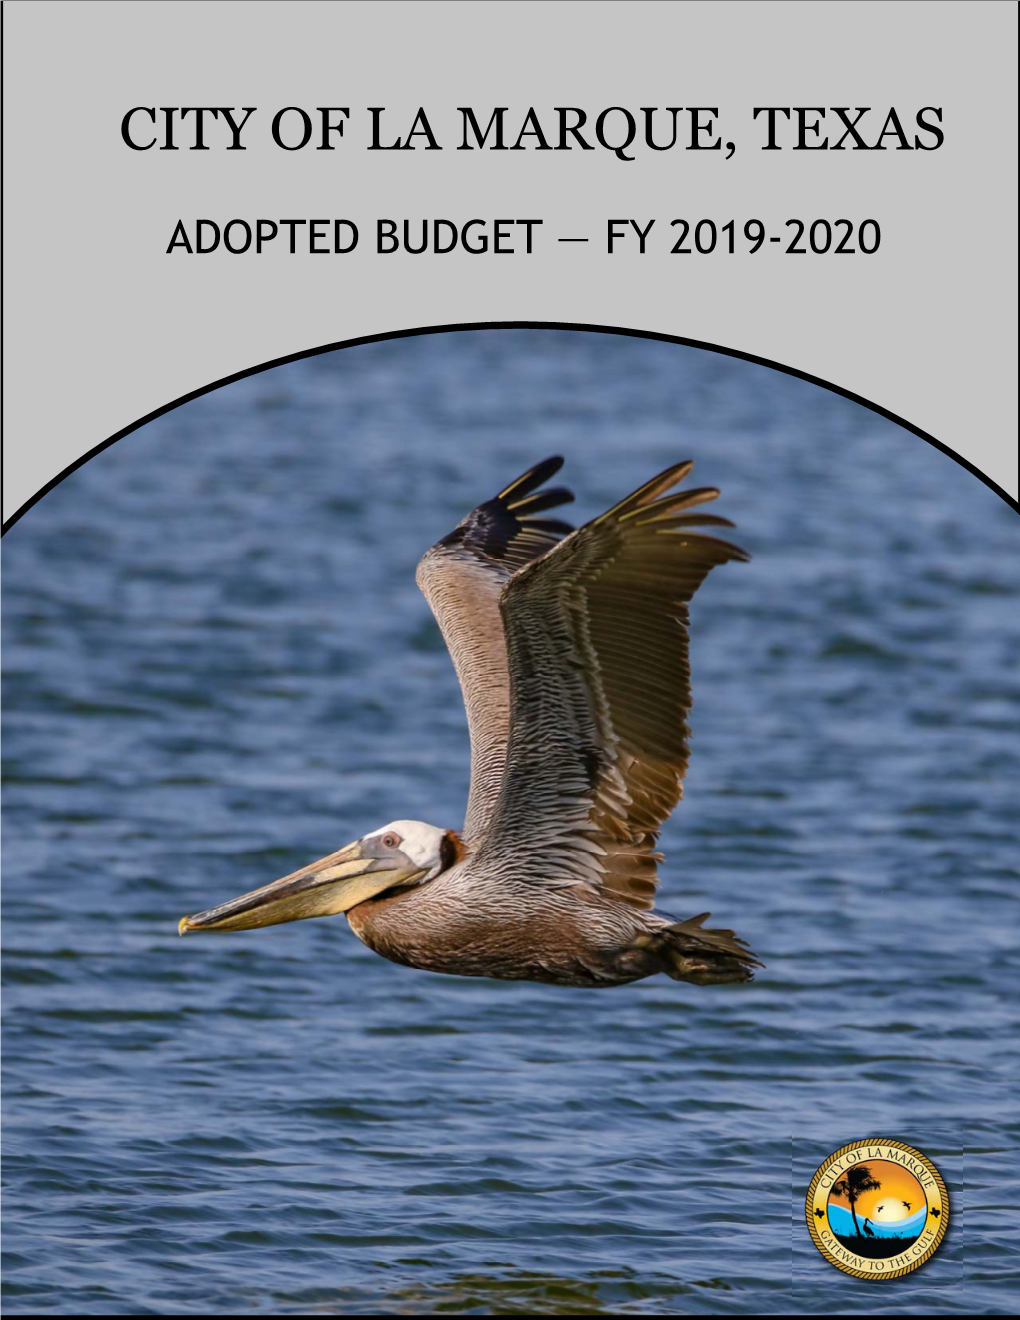 ADOPTED BUDGET — FY 2019-2020 City of La Marque Adopted FY 2019-2020 Budget